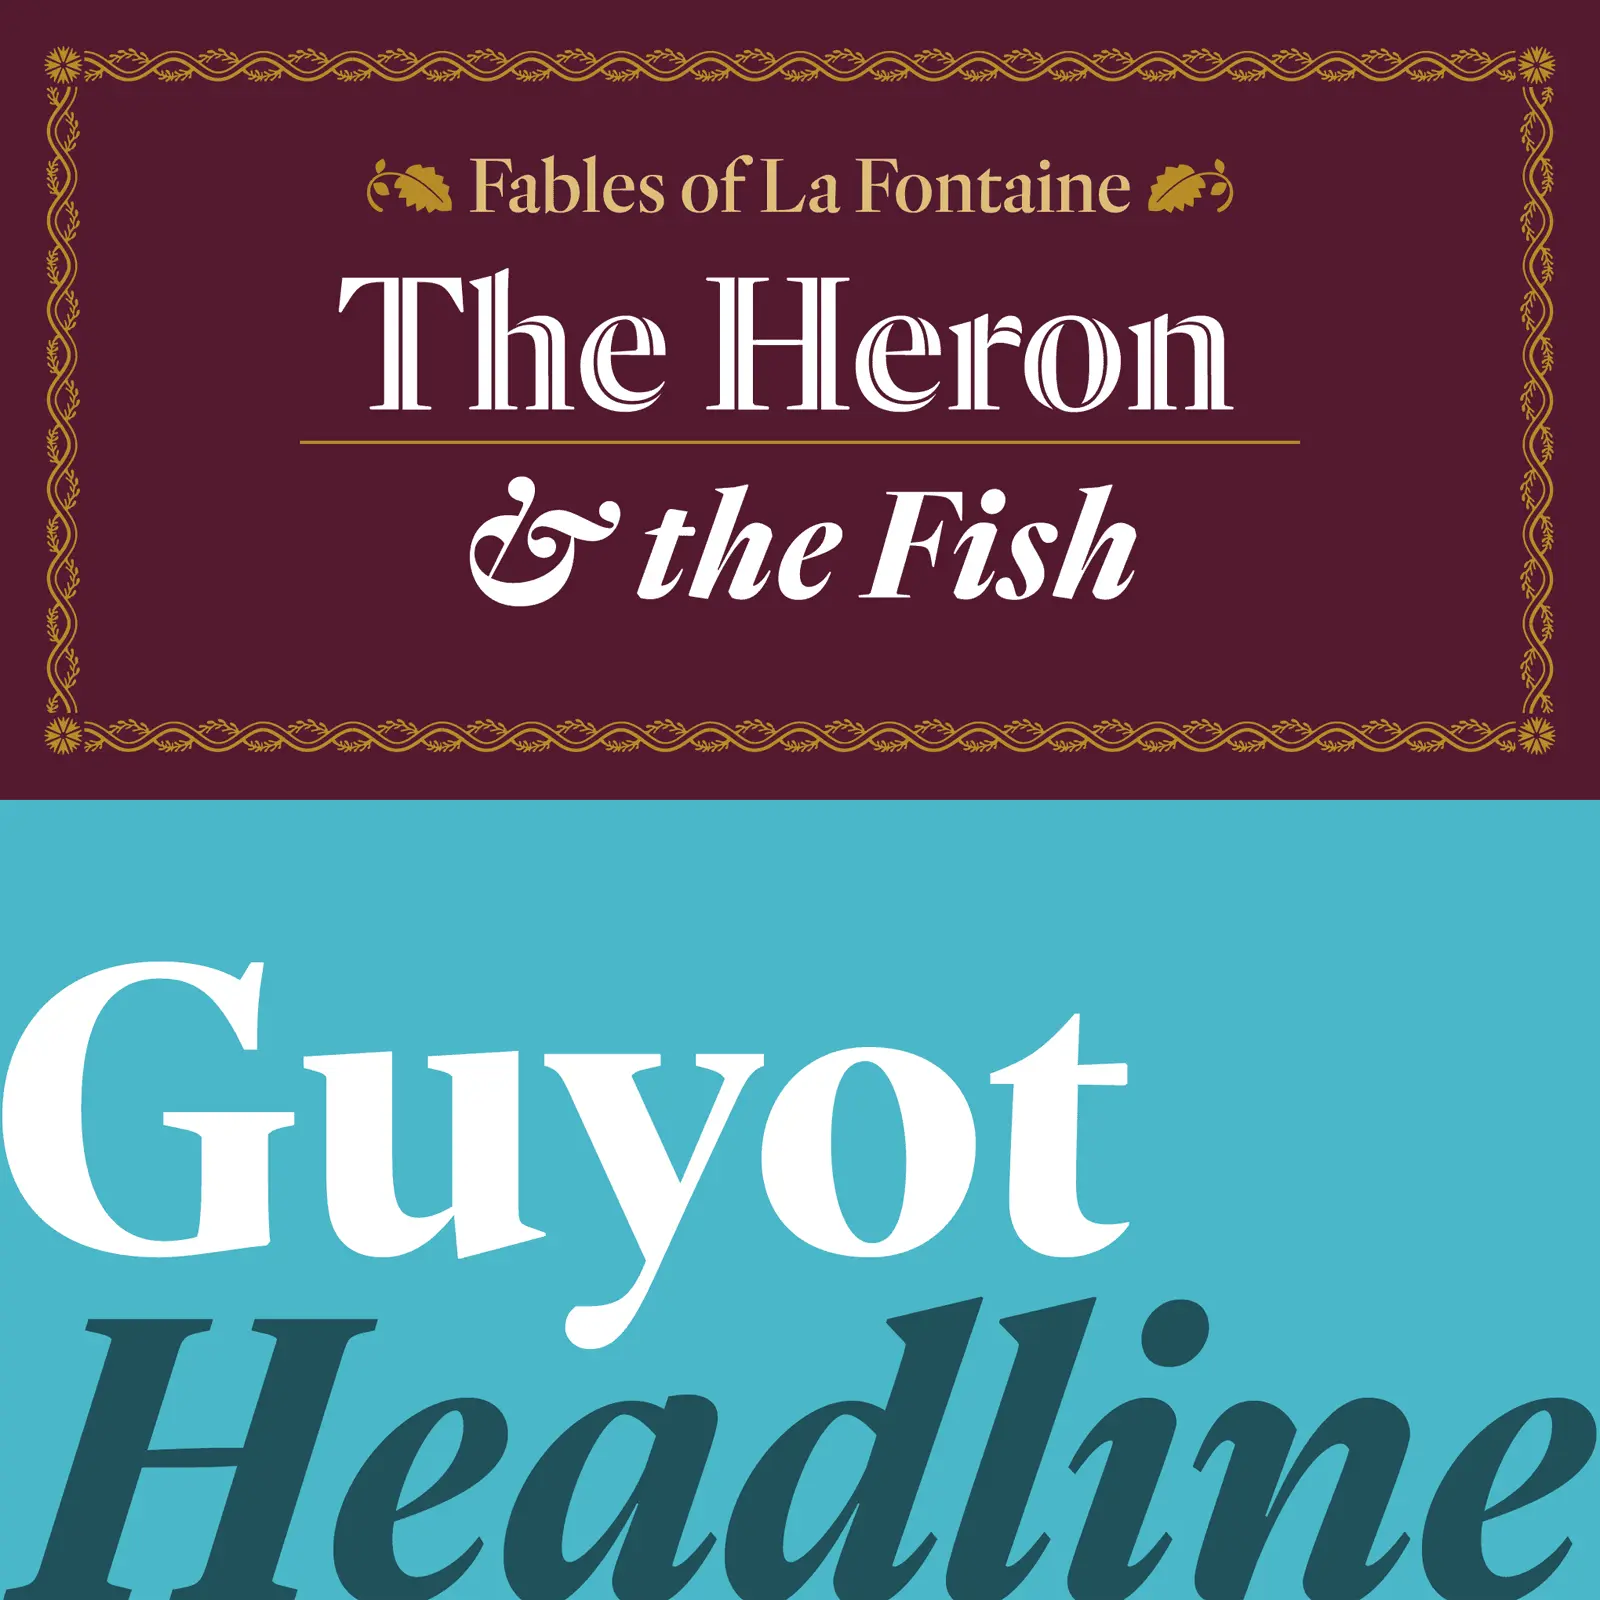 Retype Heron Font and Guyot Font. 